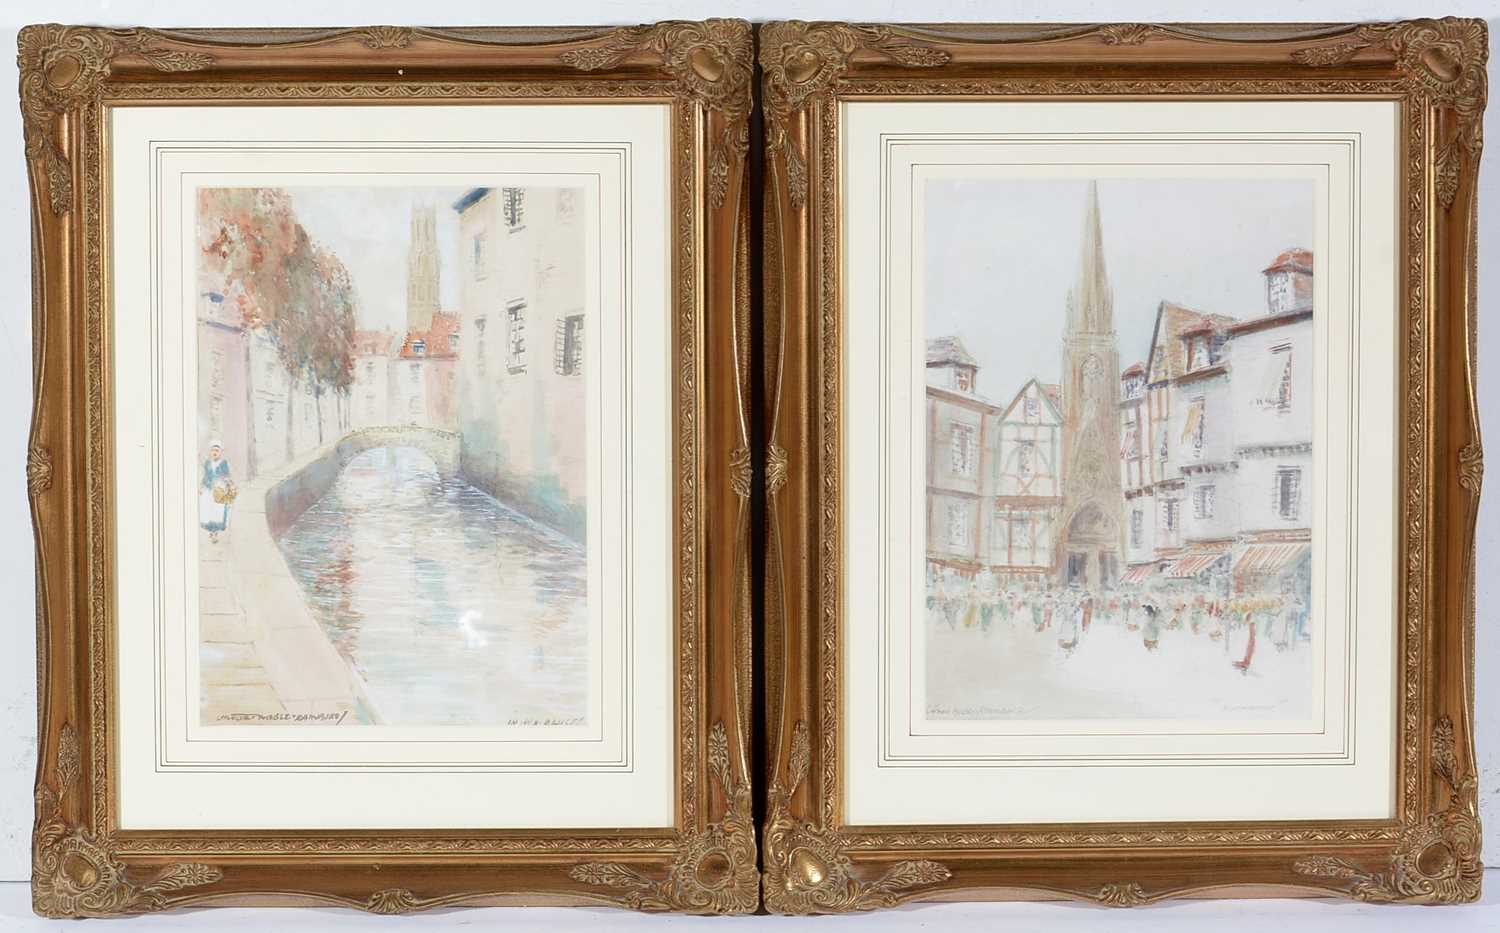 Lot 30 - Victor Noble Rainbird - Views of Normandy and Bruges | watercolour